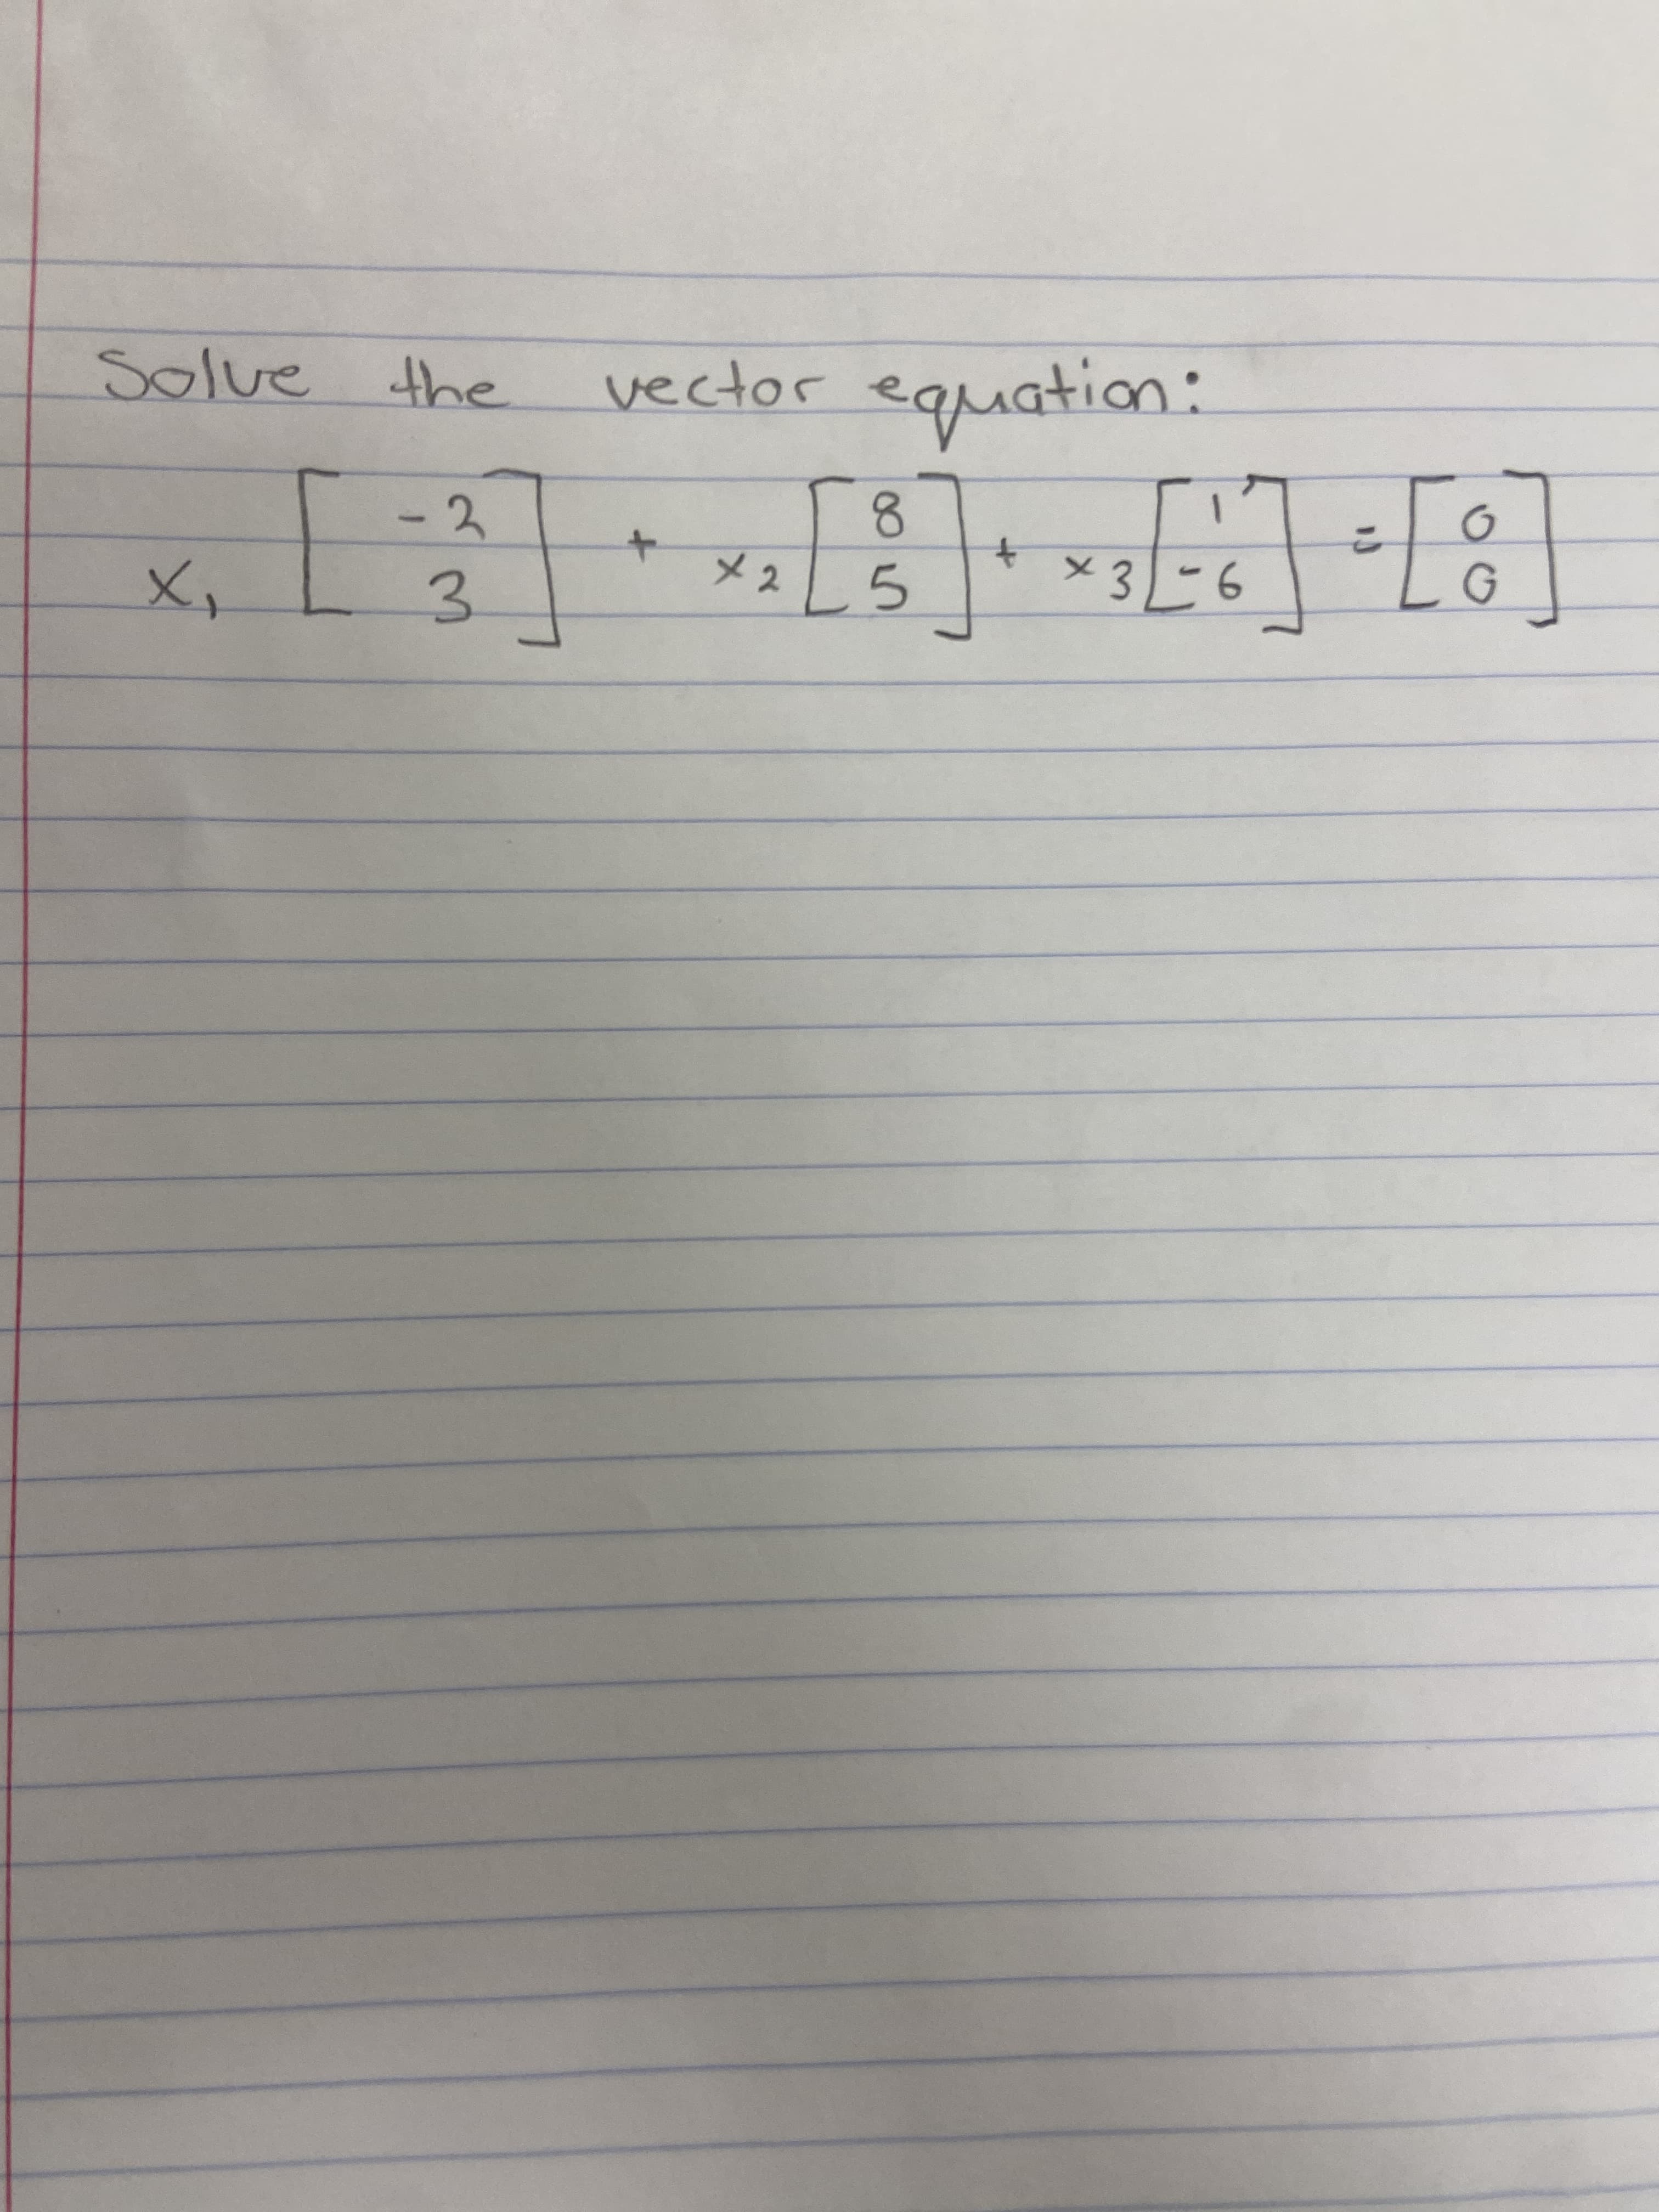 3.
Solve
the
vector equation:
-2
x2
5
x3
9-3
